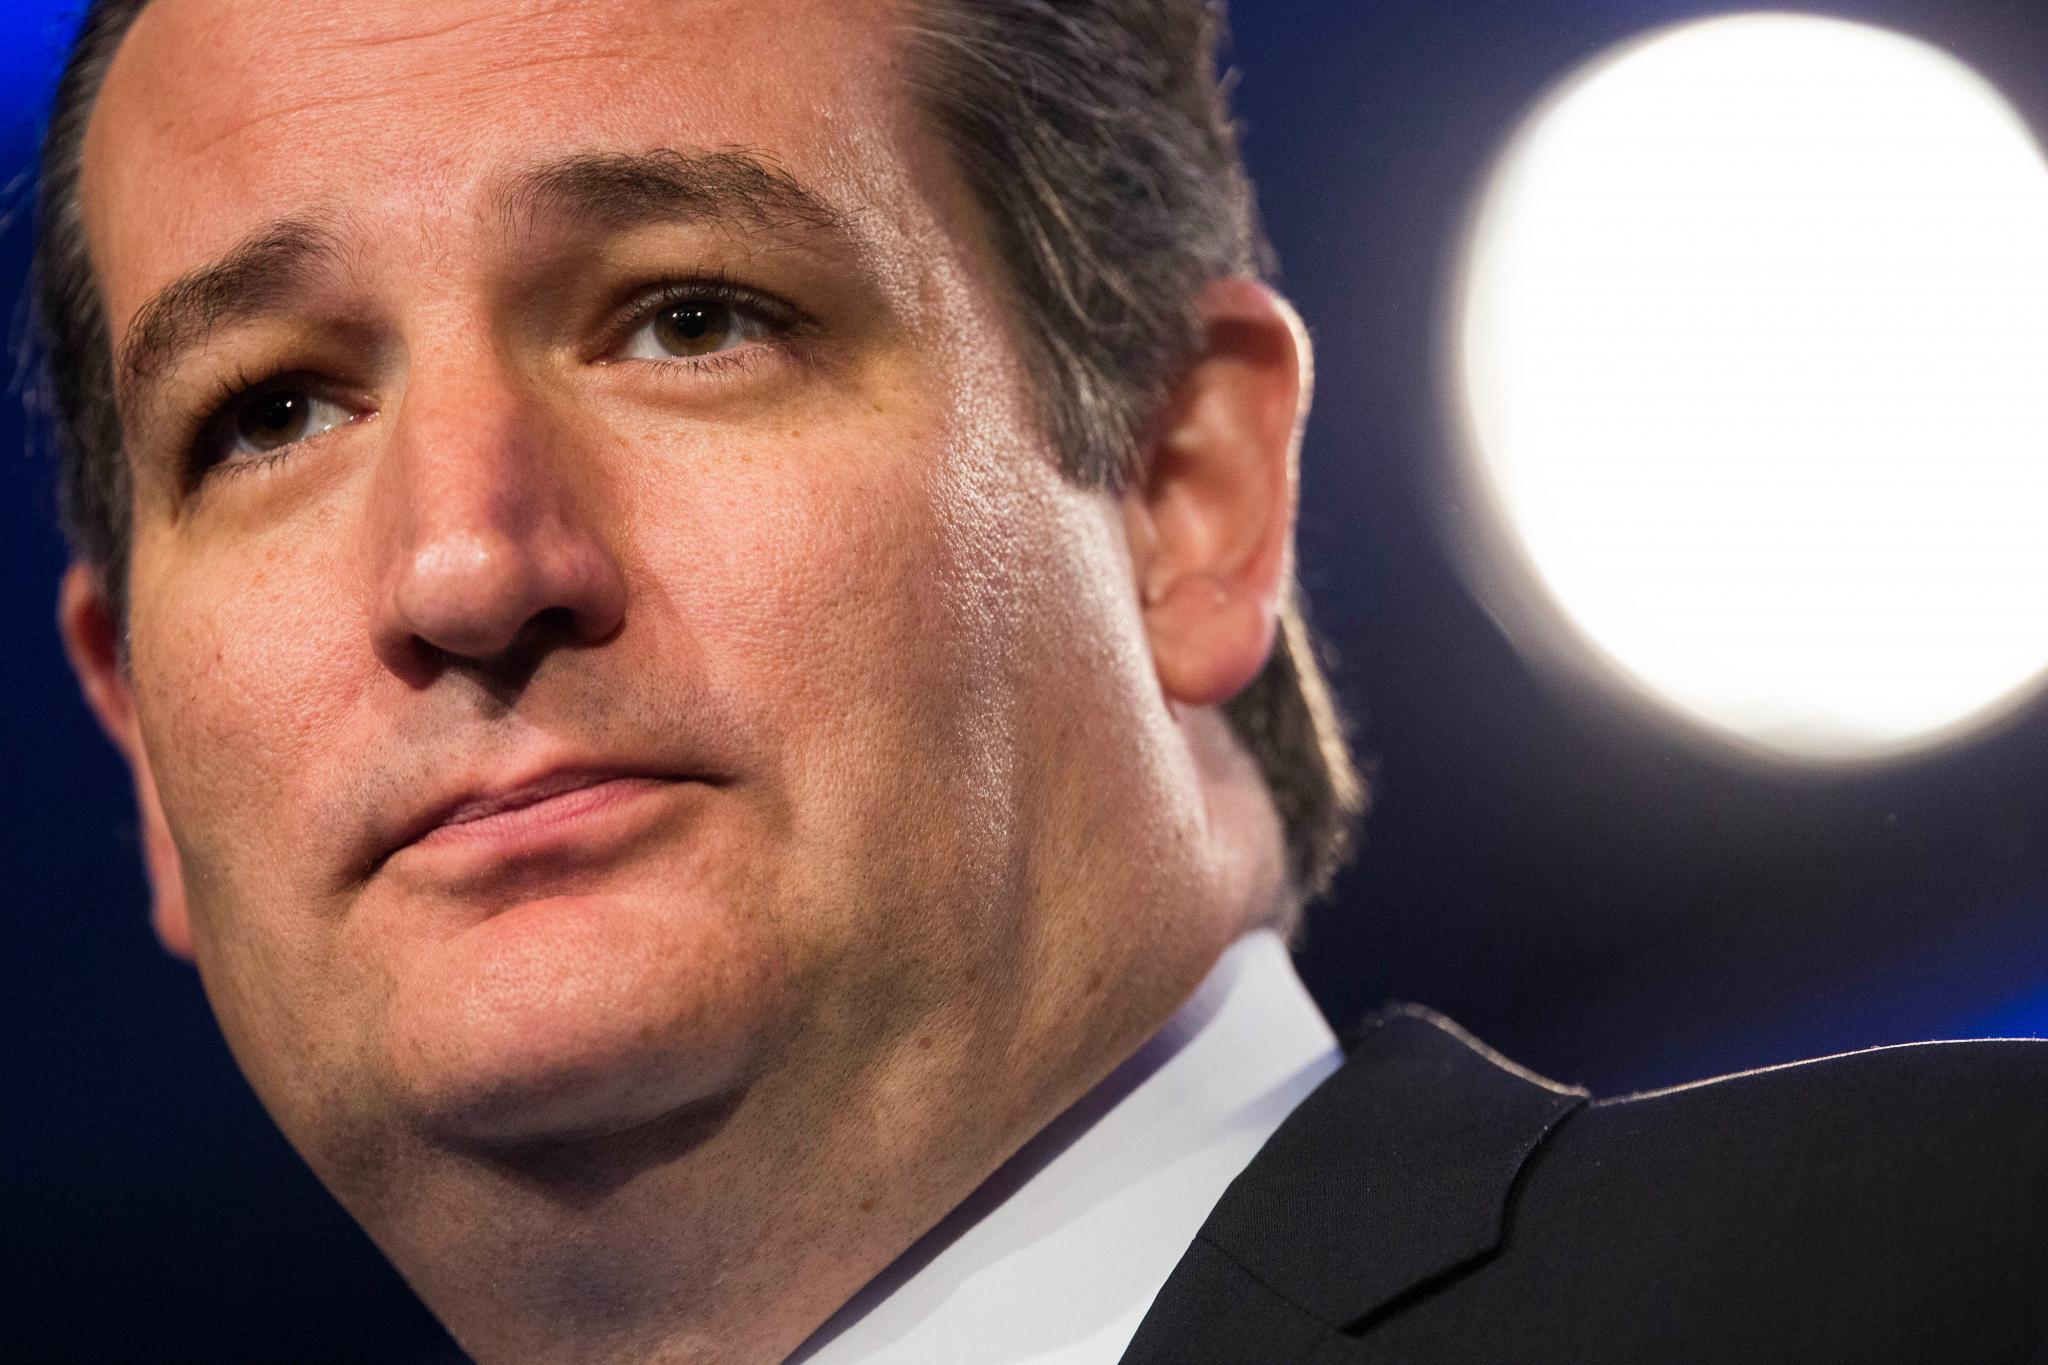 Ted Cruz Officially Drops Out Of the 2016 Presidential Race
